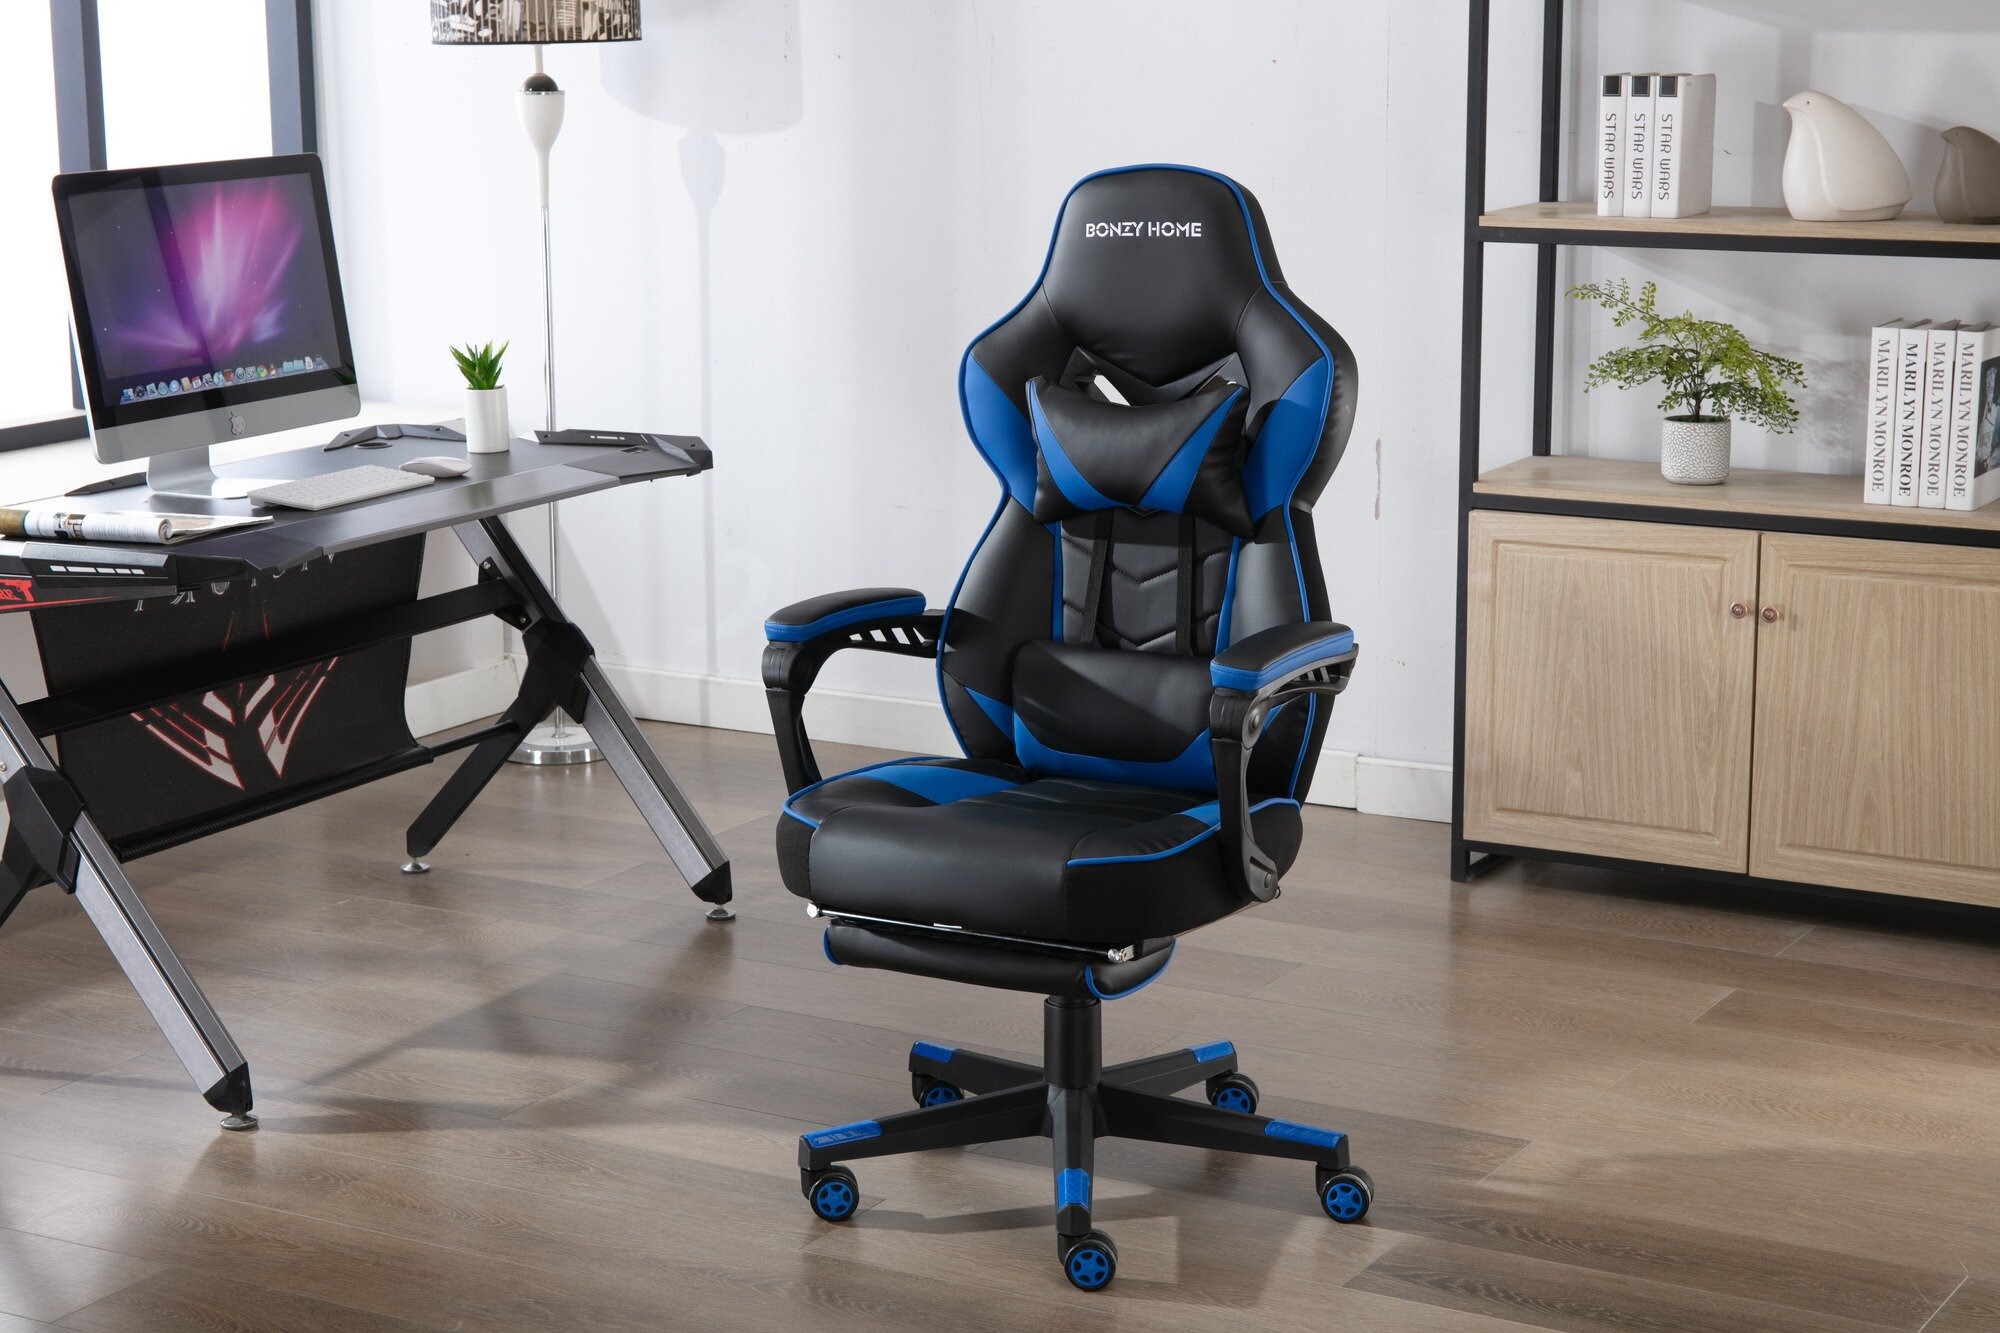 Home Office Desk Chair Computer Gaming Chair Ergonomic Executive Task Chair with Wheels Height Adjustable Swivel PU Leather Blue